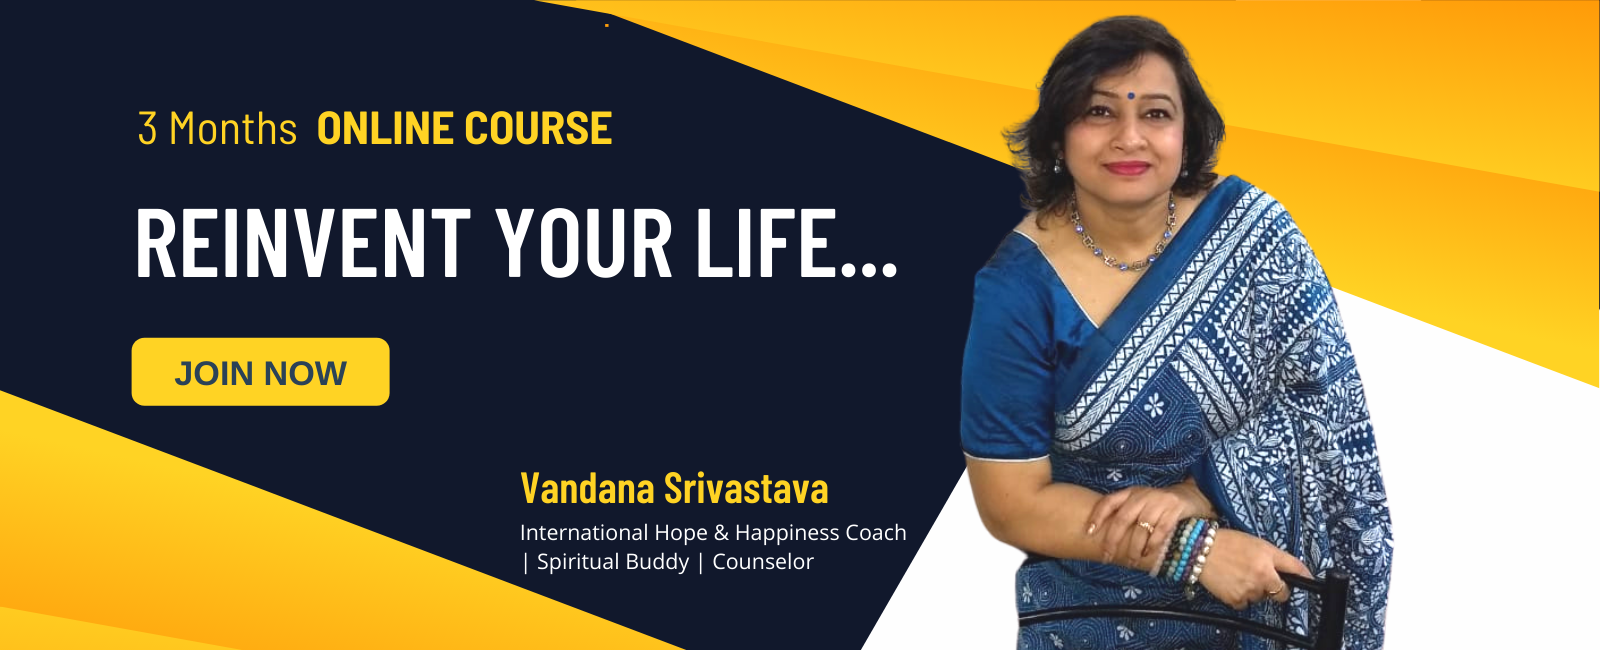 Online Course - Reinvent Your Life...